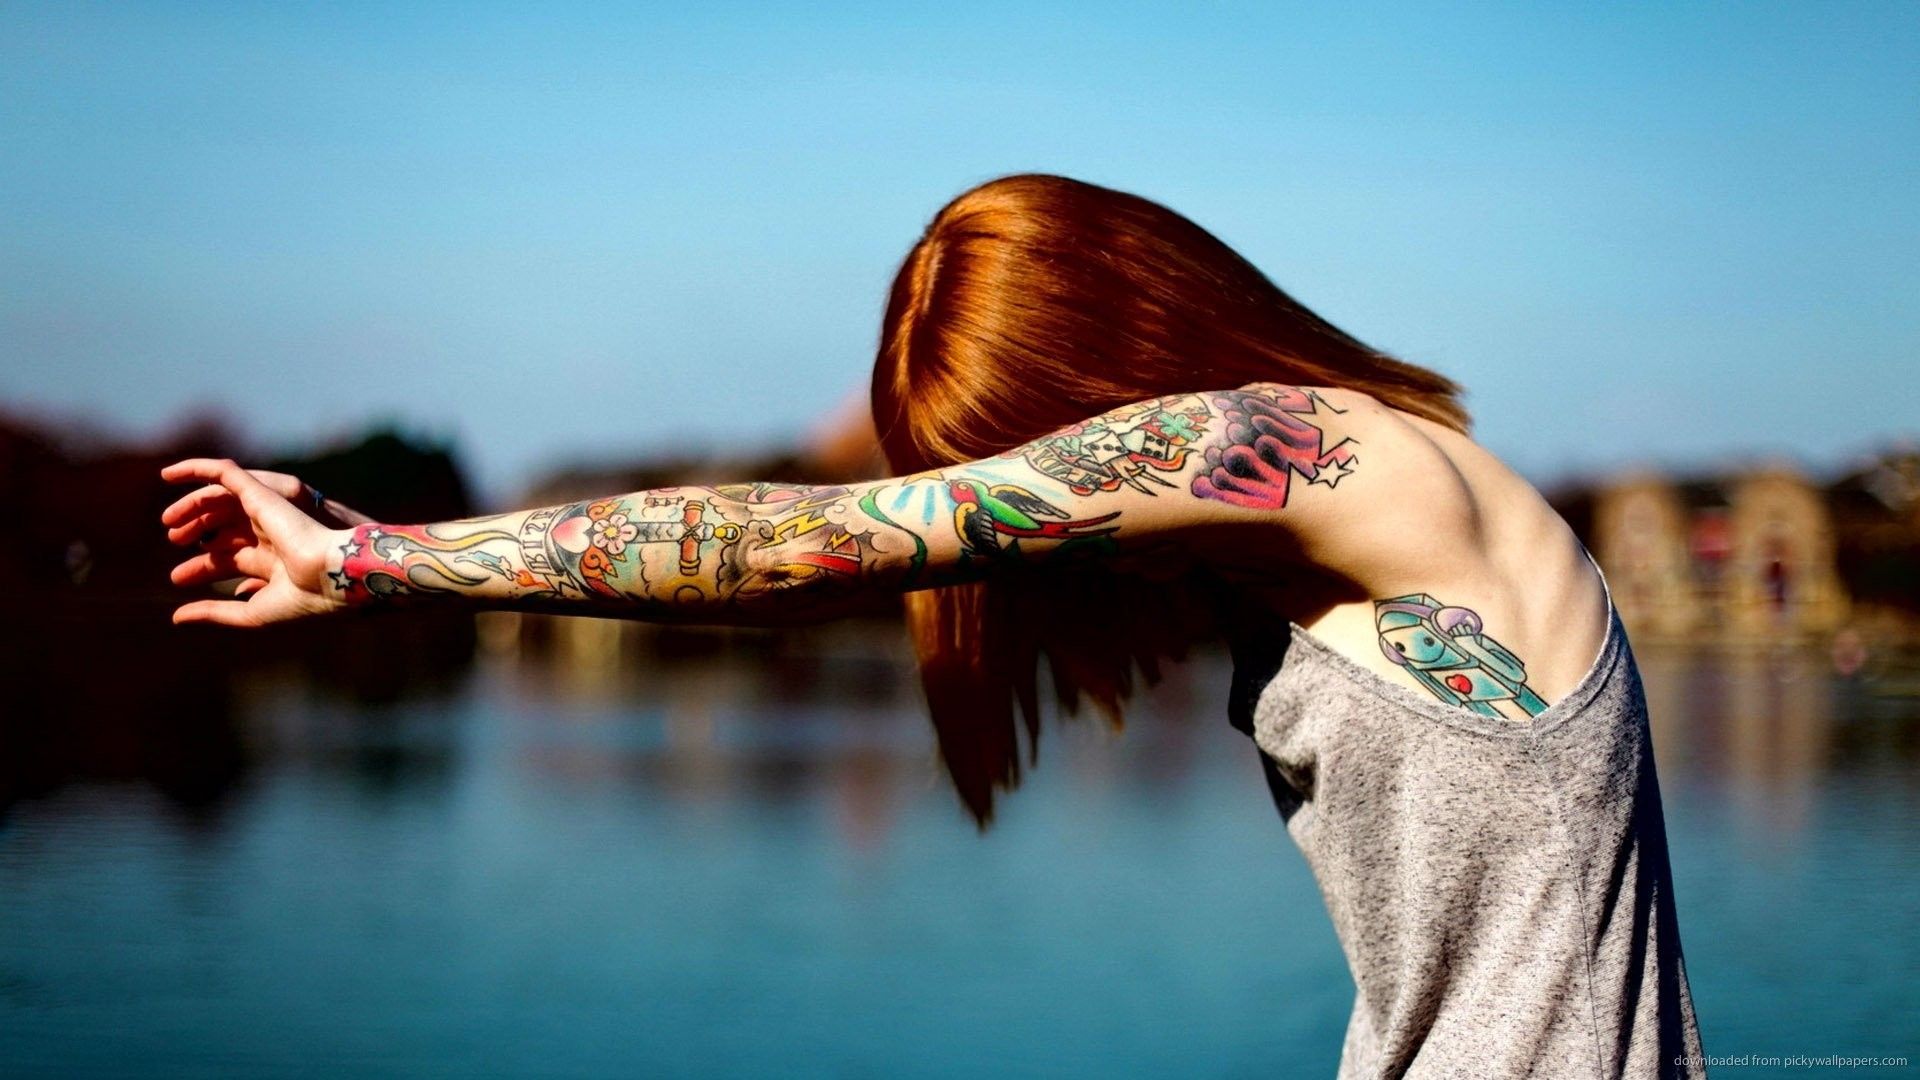 Download 1920x1080 Red Girl With Colorful Tattoos Wallpaper